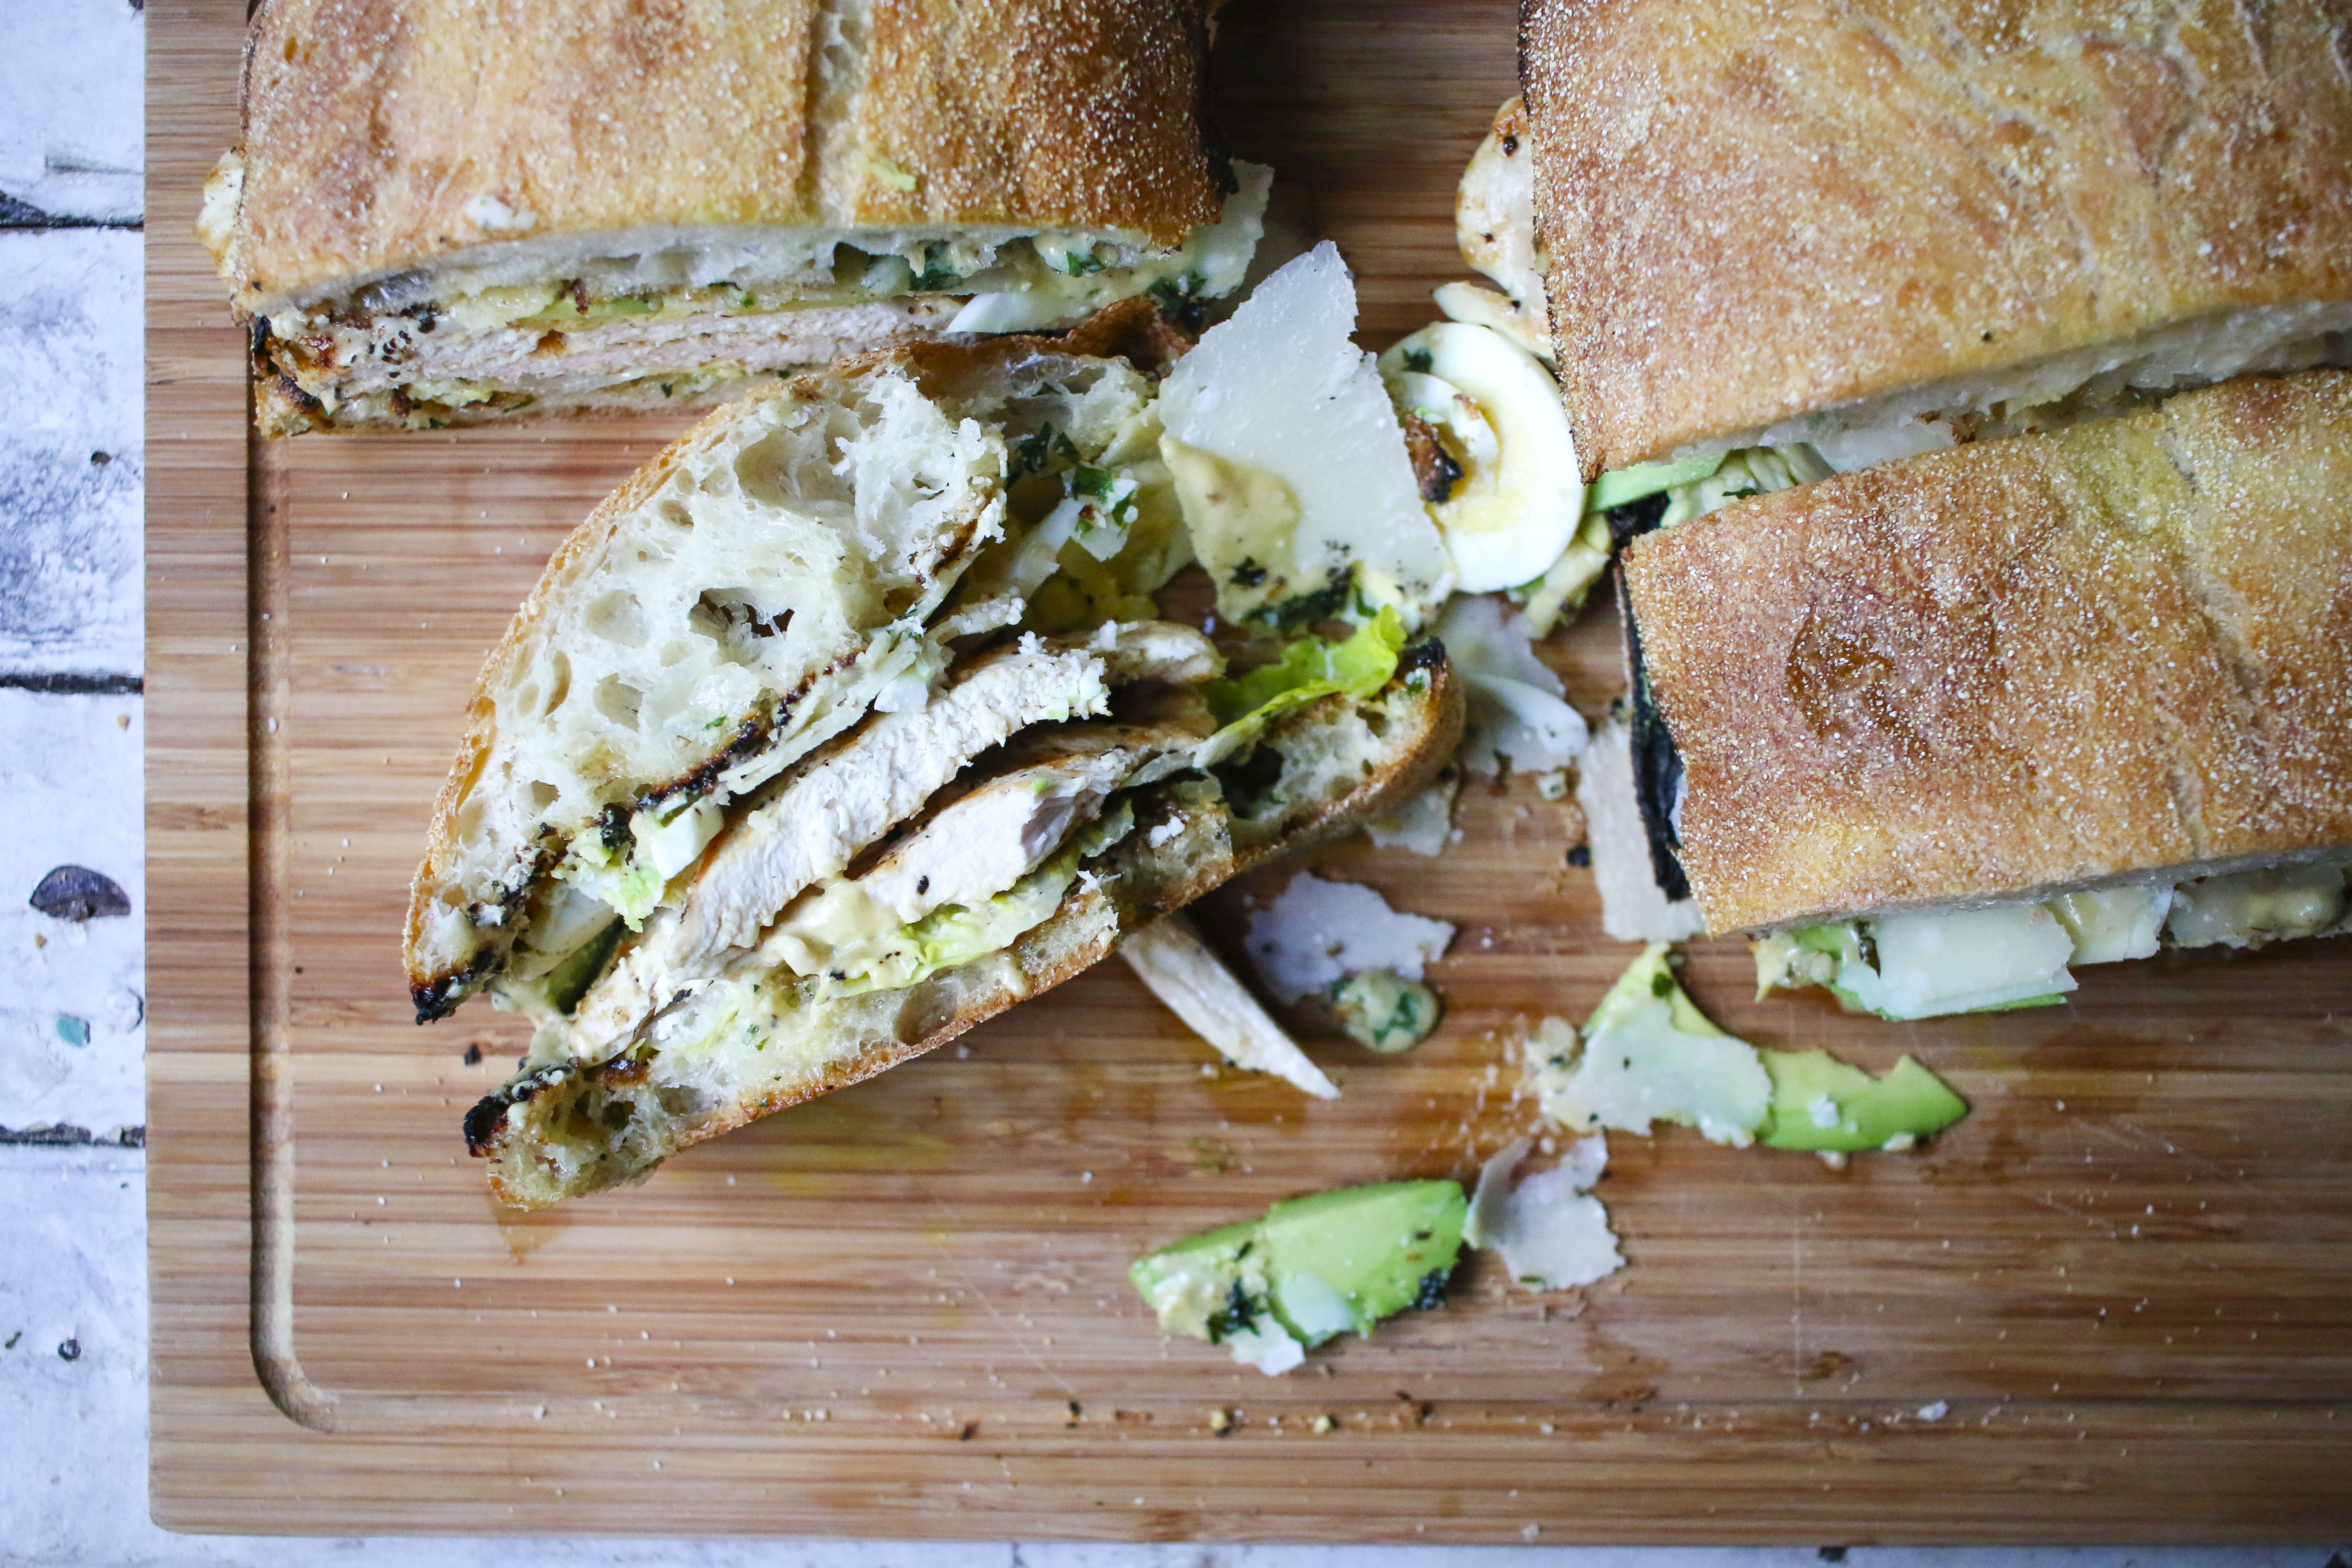 Chicken Caesar Salad Sandwich on Ciabatta Garlic Bread with Homemade Caesar spread, Avocado, Hard boiled eggs, and Shaved Parmesan | I Will Not Eat Oysters